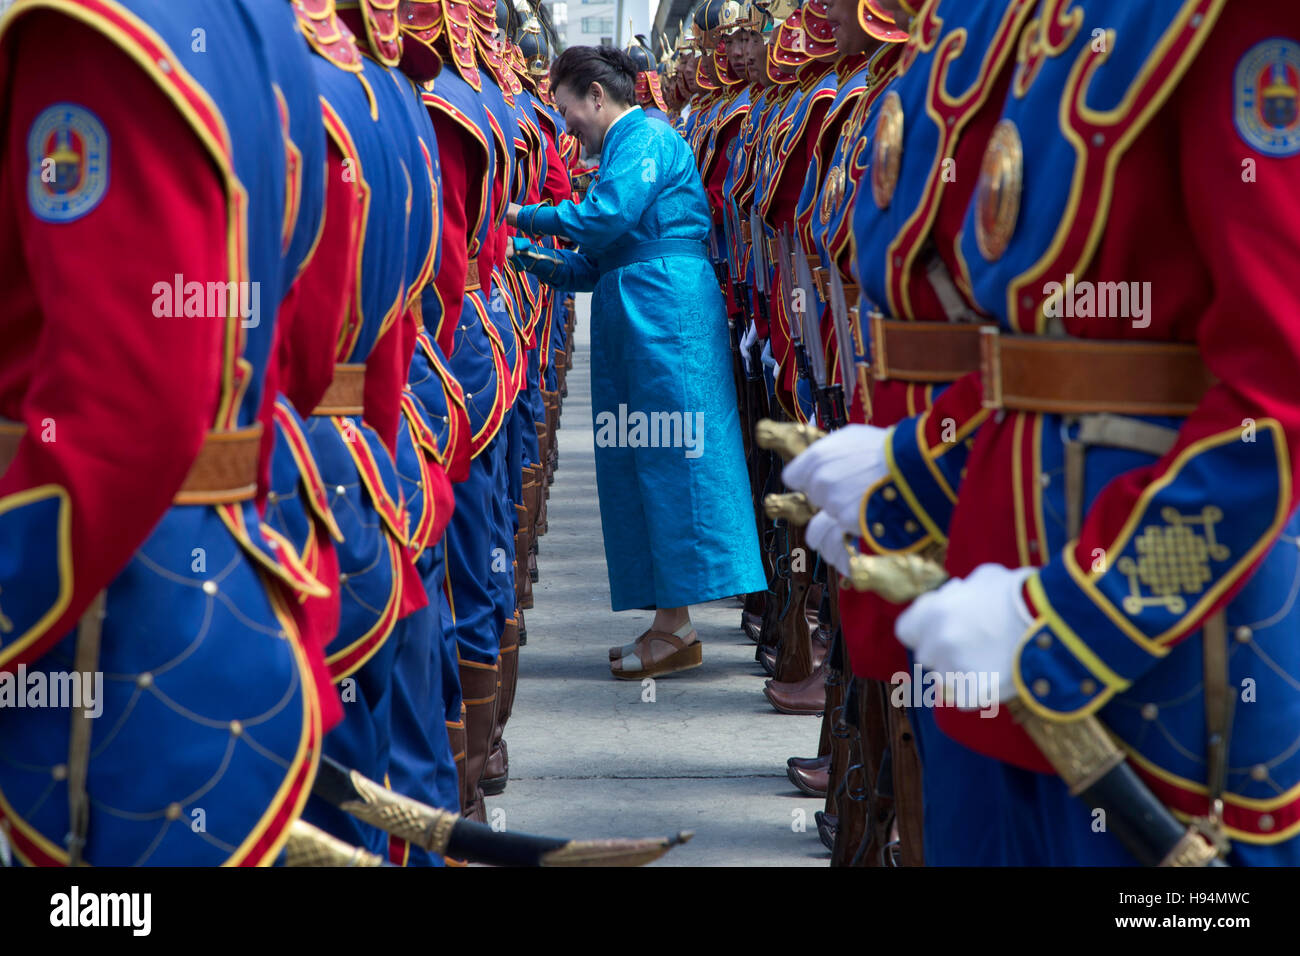 In the city of Mongolia, ulanbatur,  the state show group prepares for the anniversary of the liberation of the city. Stock Photo